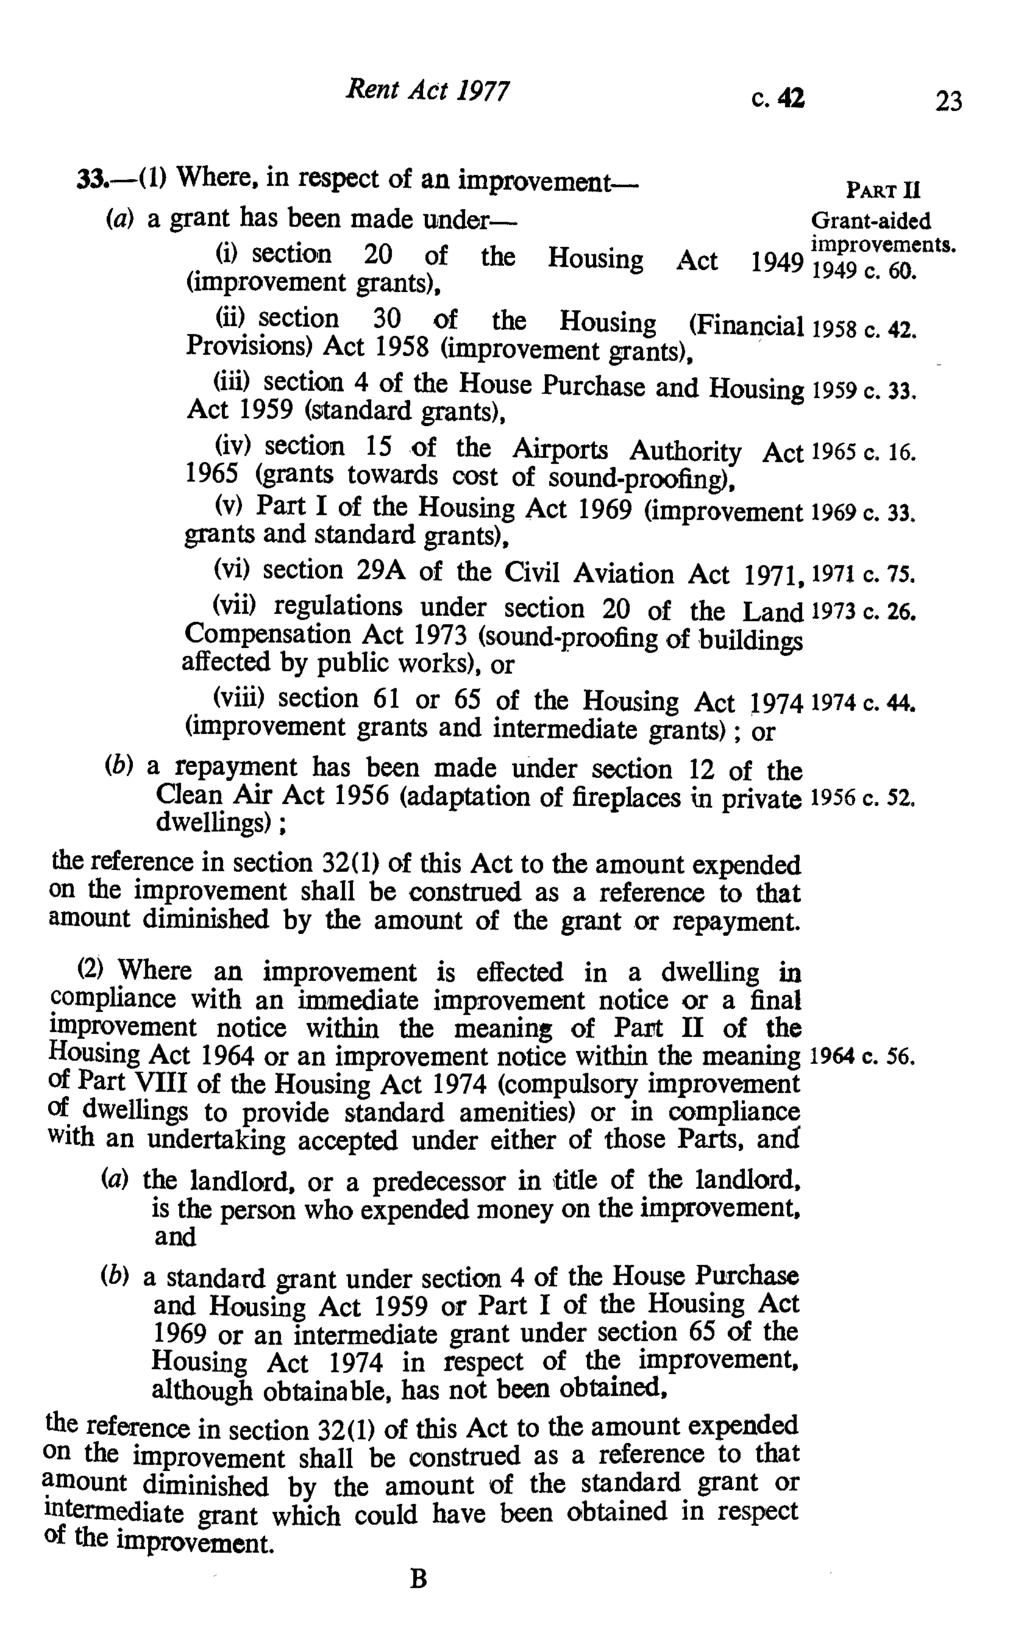 Rent Act 1977 c.42 23 33.-(1) Where, in respect of an improvement- PART II (a) a grant has been made under- Grant-aided Q) section 20 of the Housing Act 1949 improvements. 1949 c. 60.